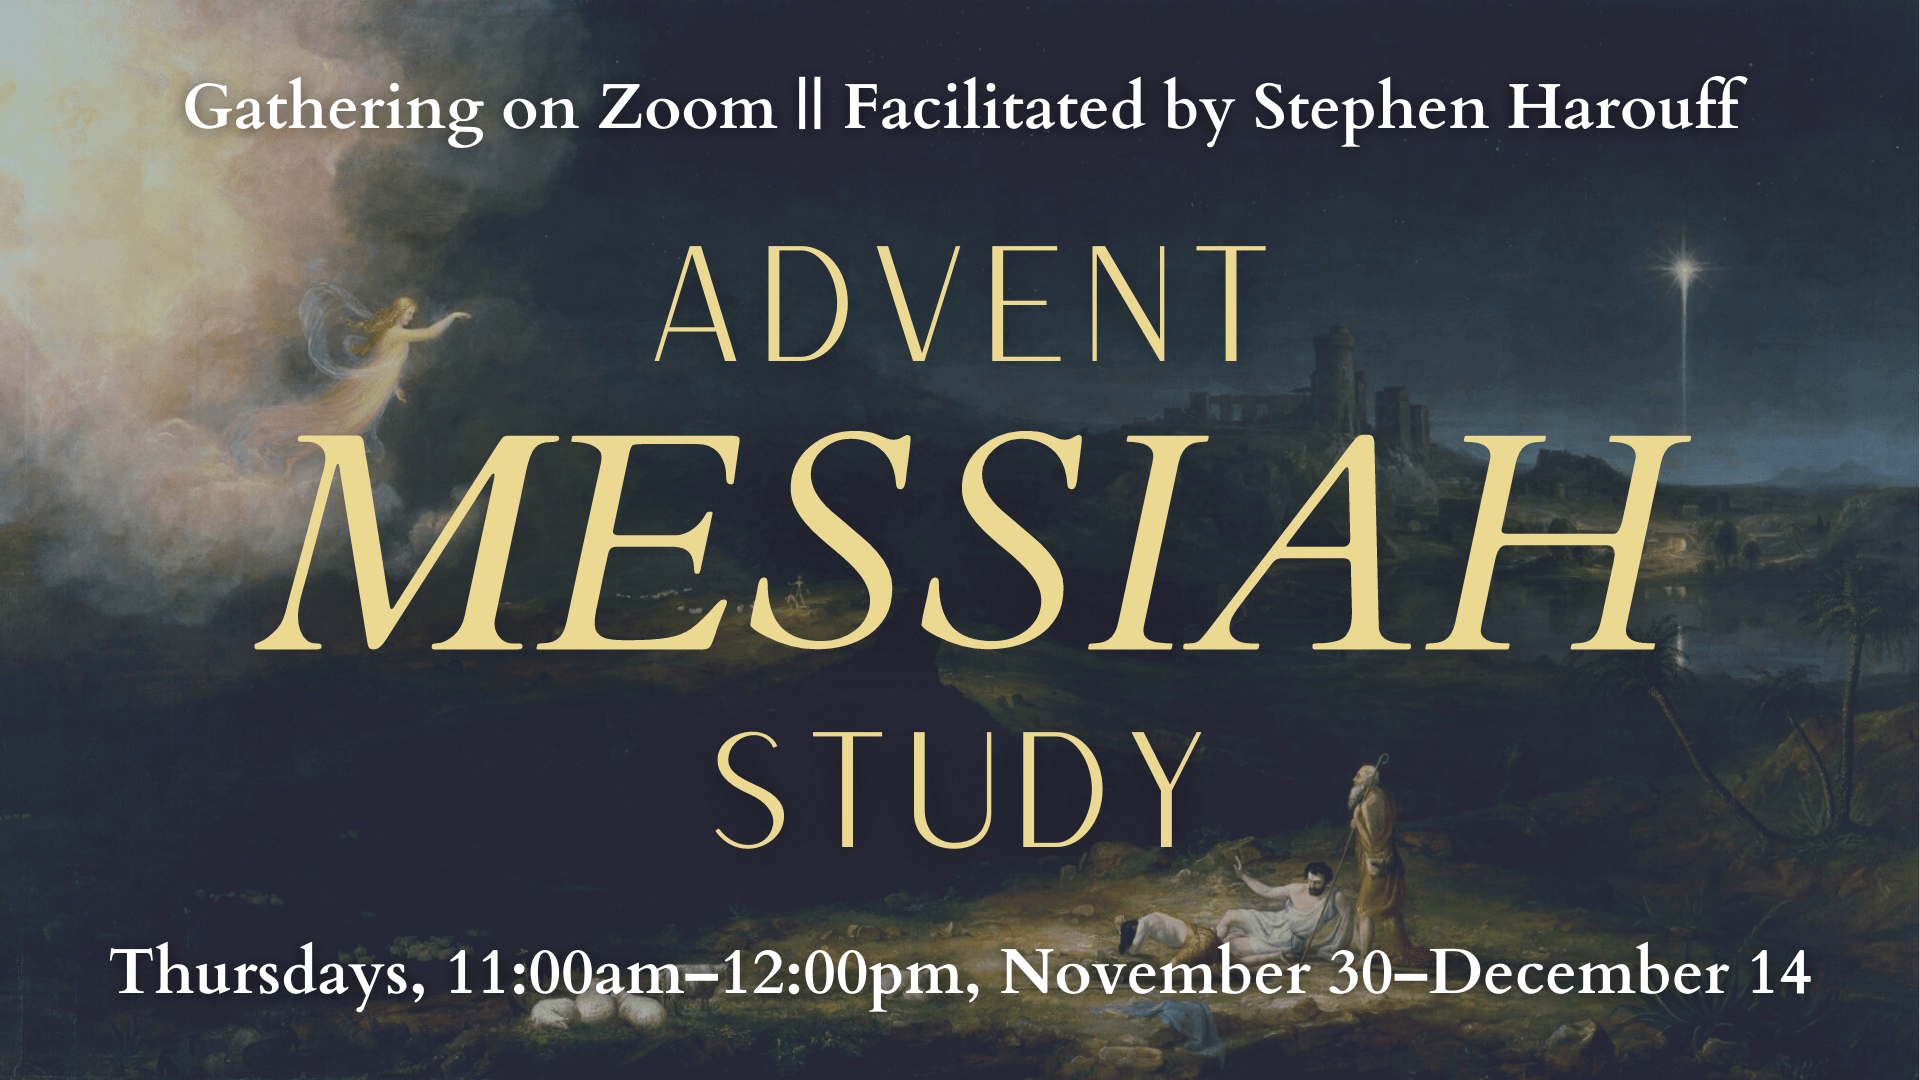 Graphic that says "Gathering on Zoom || Facilitated by Stephen Harouff. ADVENT MESSIAH STUDY. Thursdays, 11:00am-12:00pm, November 30-December 14."